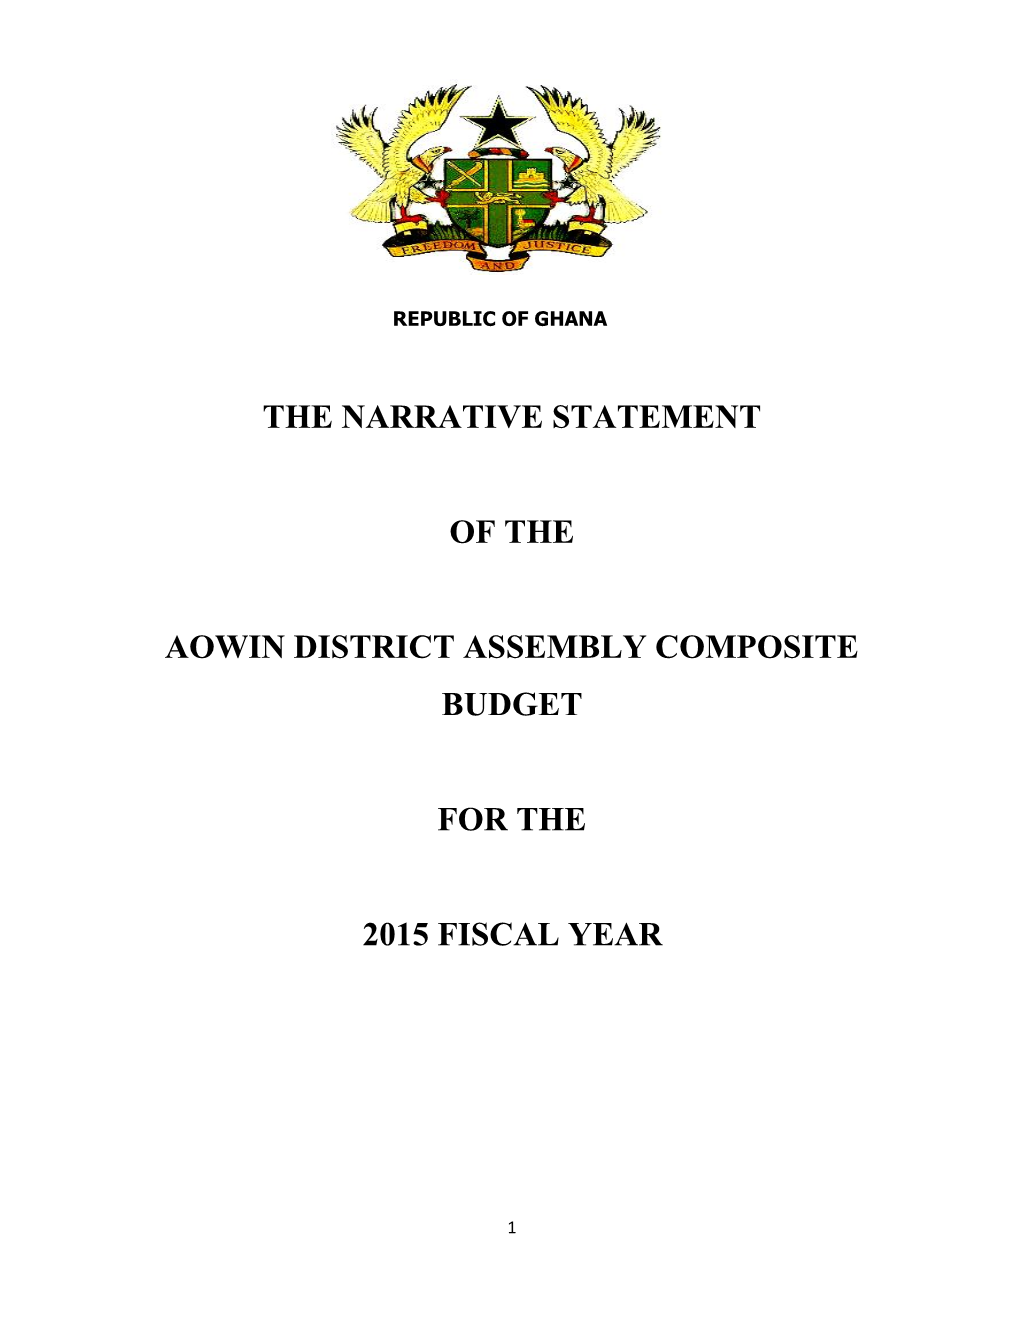 Aowin District Assembly Composite Budget